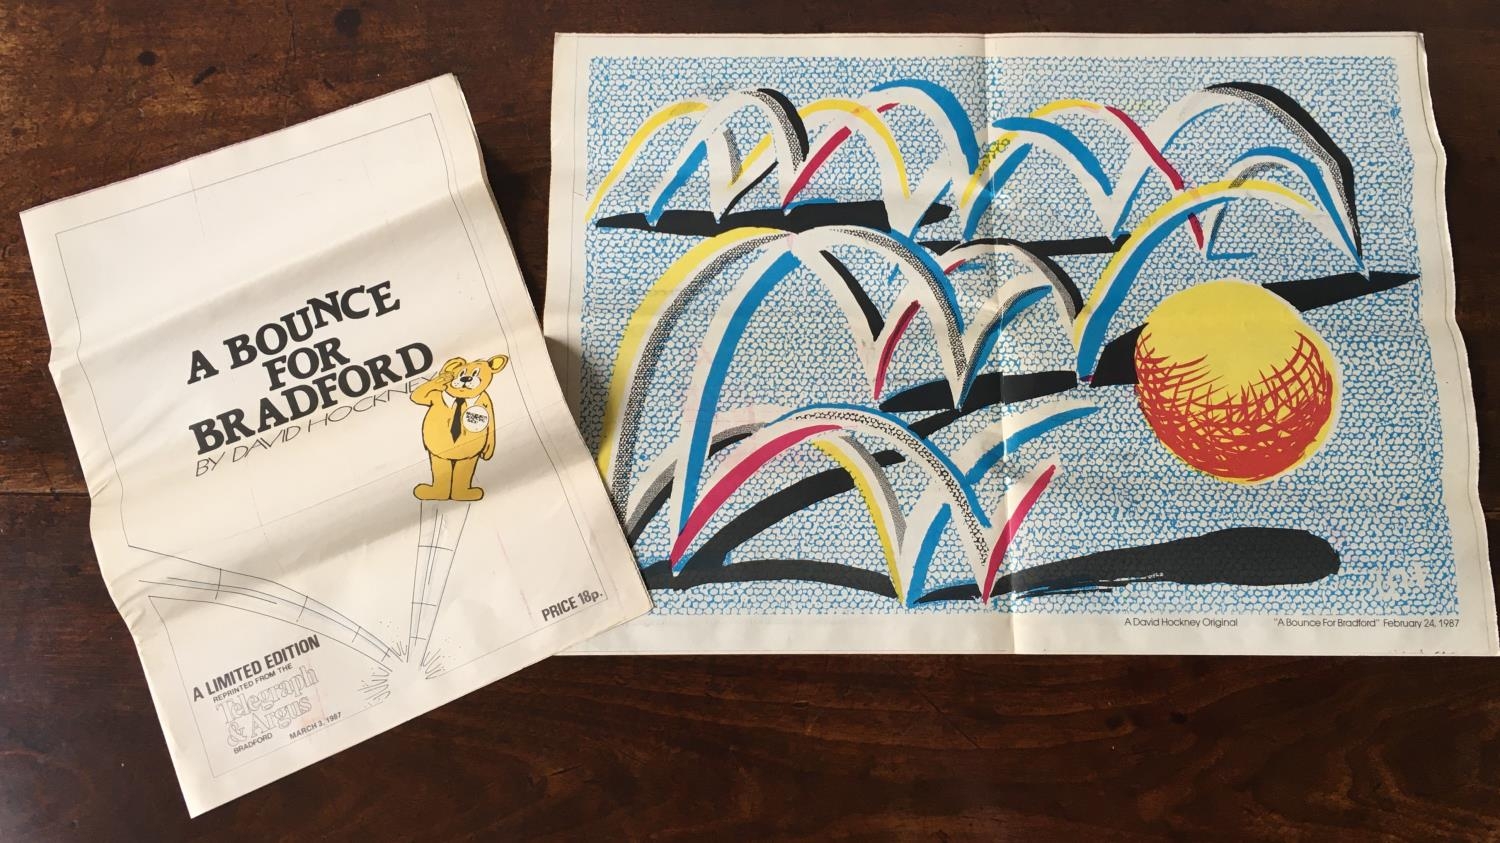 DAVID HOCKNEY, 'BOUNCE FOR FOR BRADFORD LIMITED EDITION LITHOGRAPH, Feb 24th 1987, newspaper